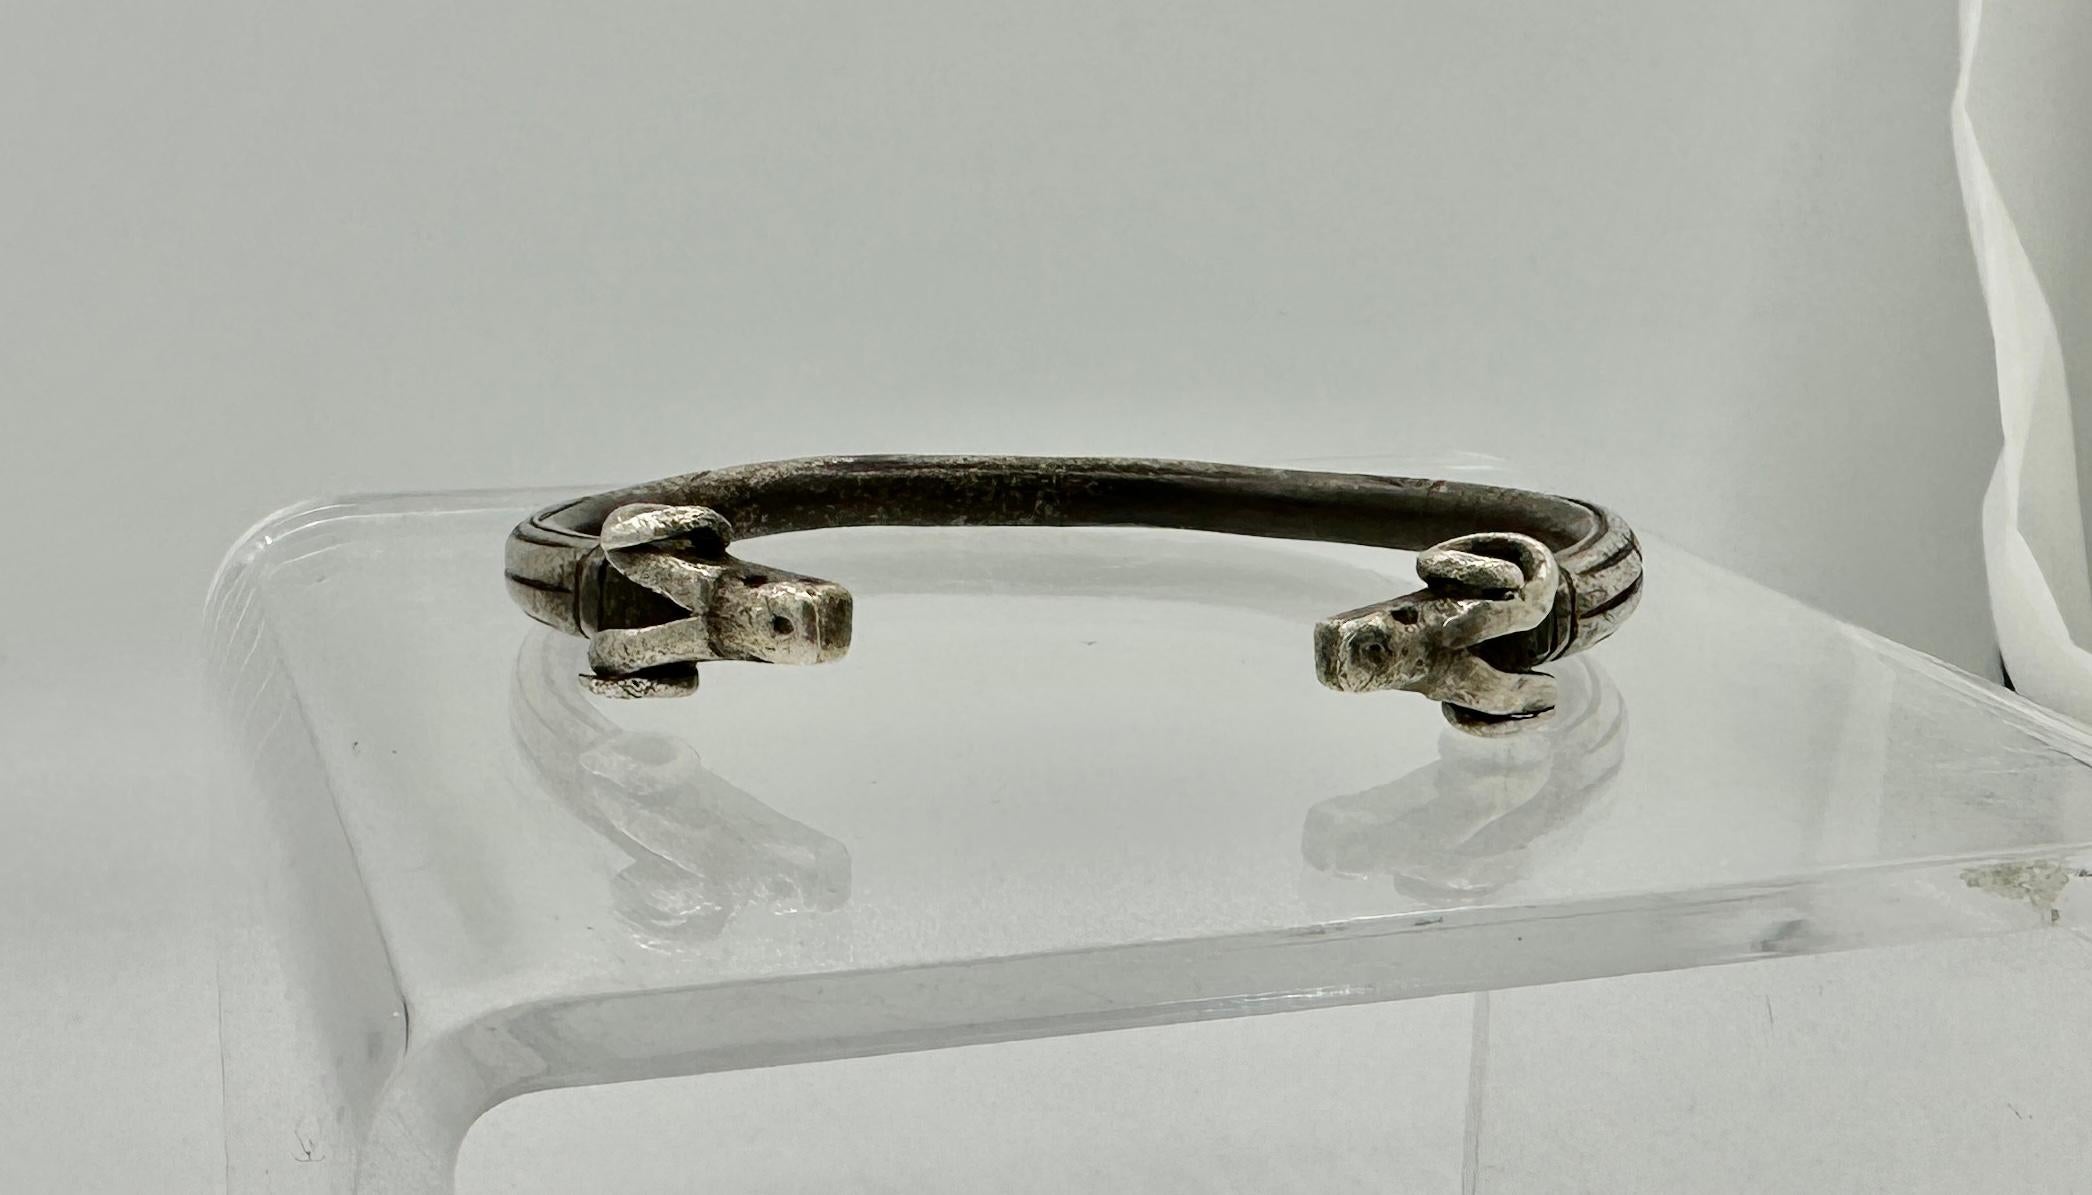 Women's or Men's Ancient Greek Silver Bracelet with Rams Heads 4th century BC Museum Quality For Sale